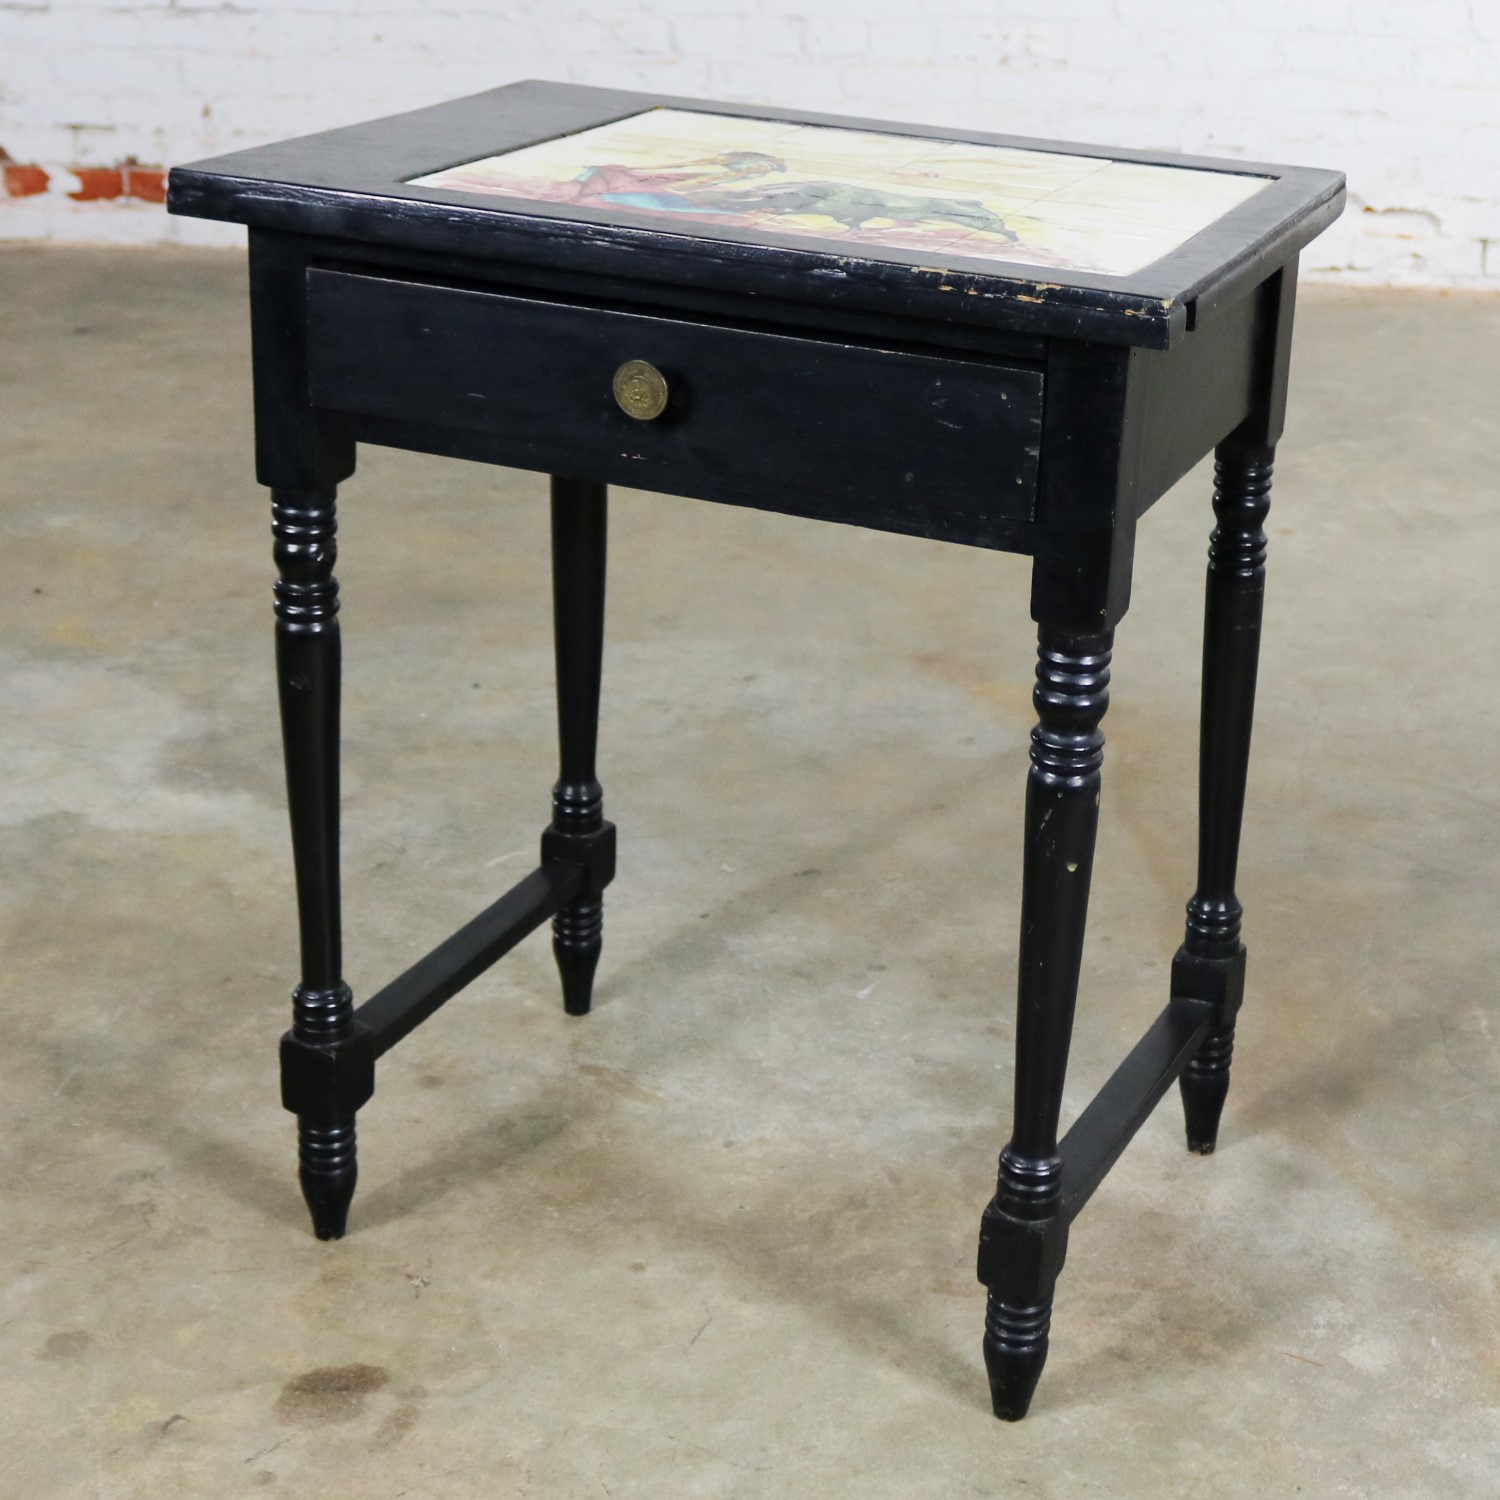 Vintage Black Turned Leg Drawered End Table with Matador and Bull Tile Insert Top